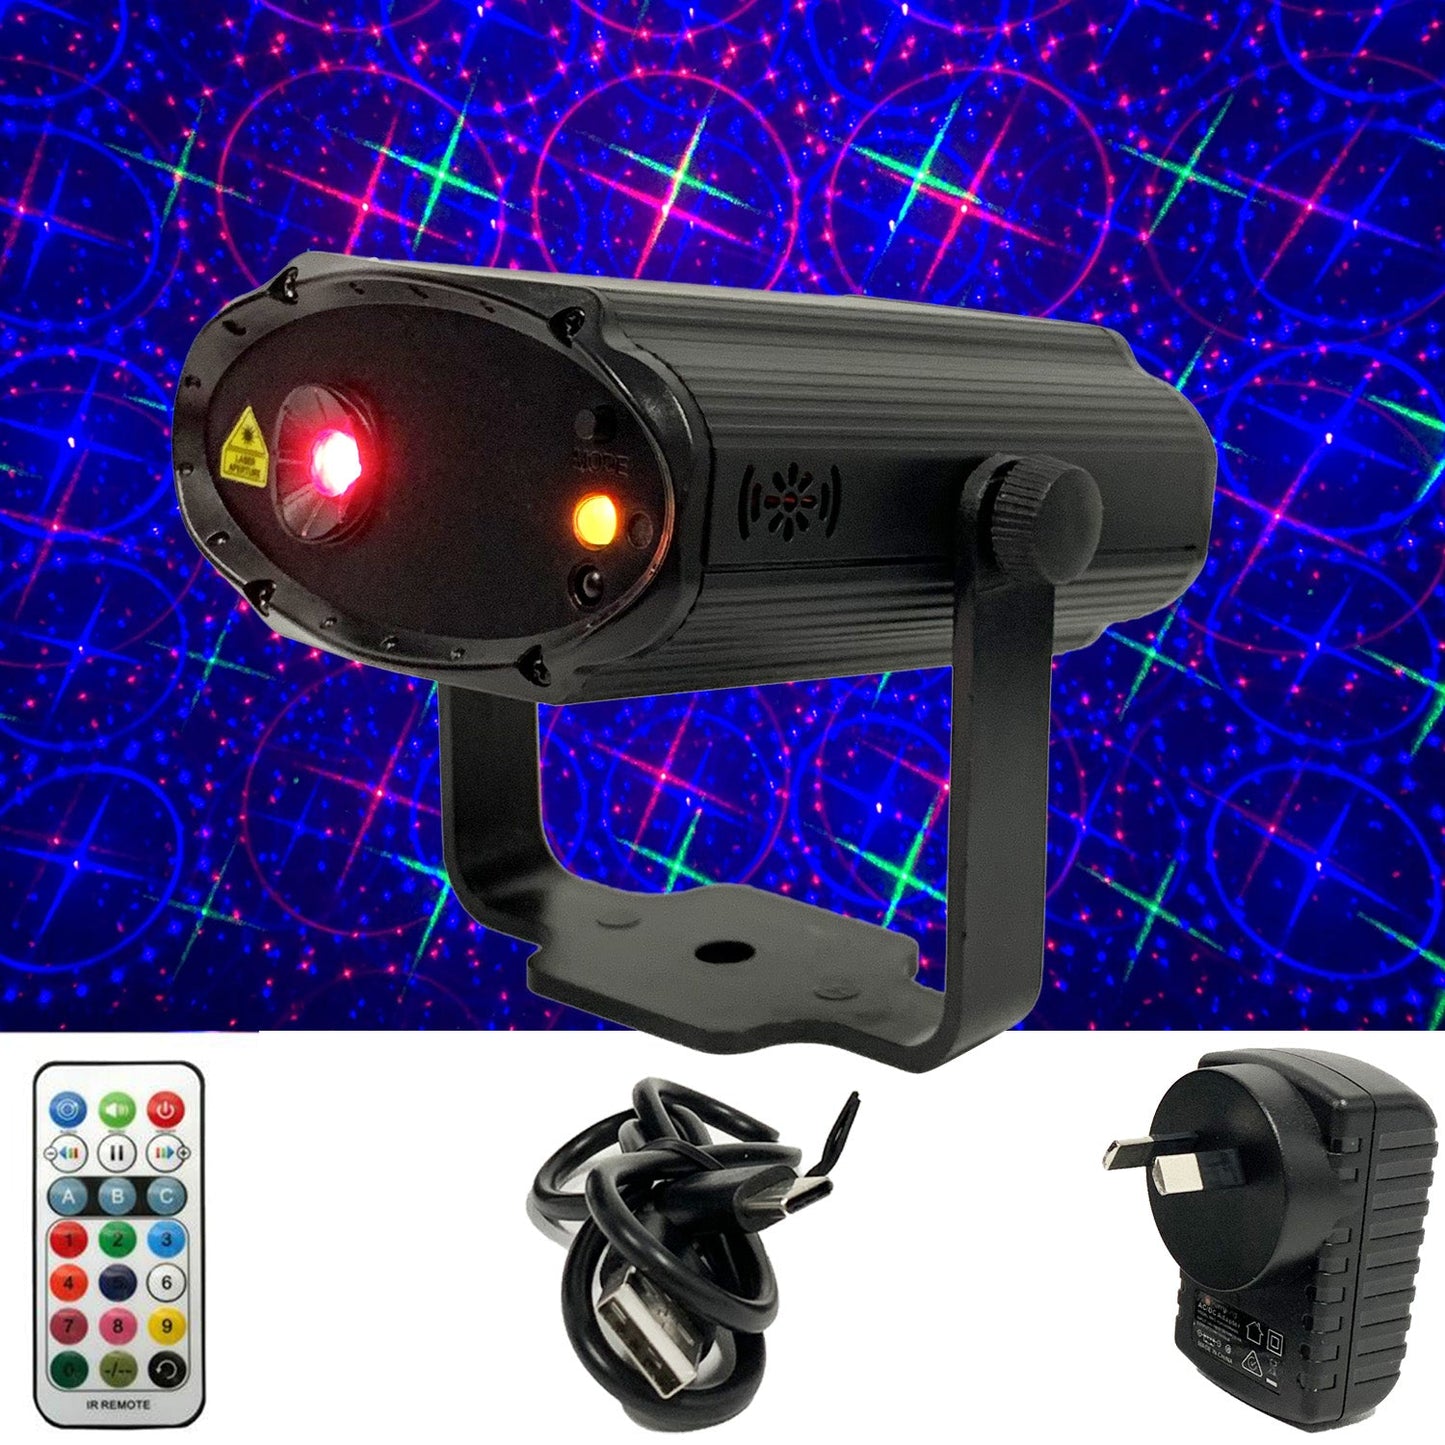 CR Laser Portable Mini Red Green Blue full color laser 8 patterns USB C Connection with Remote Controller